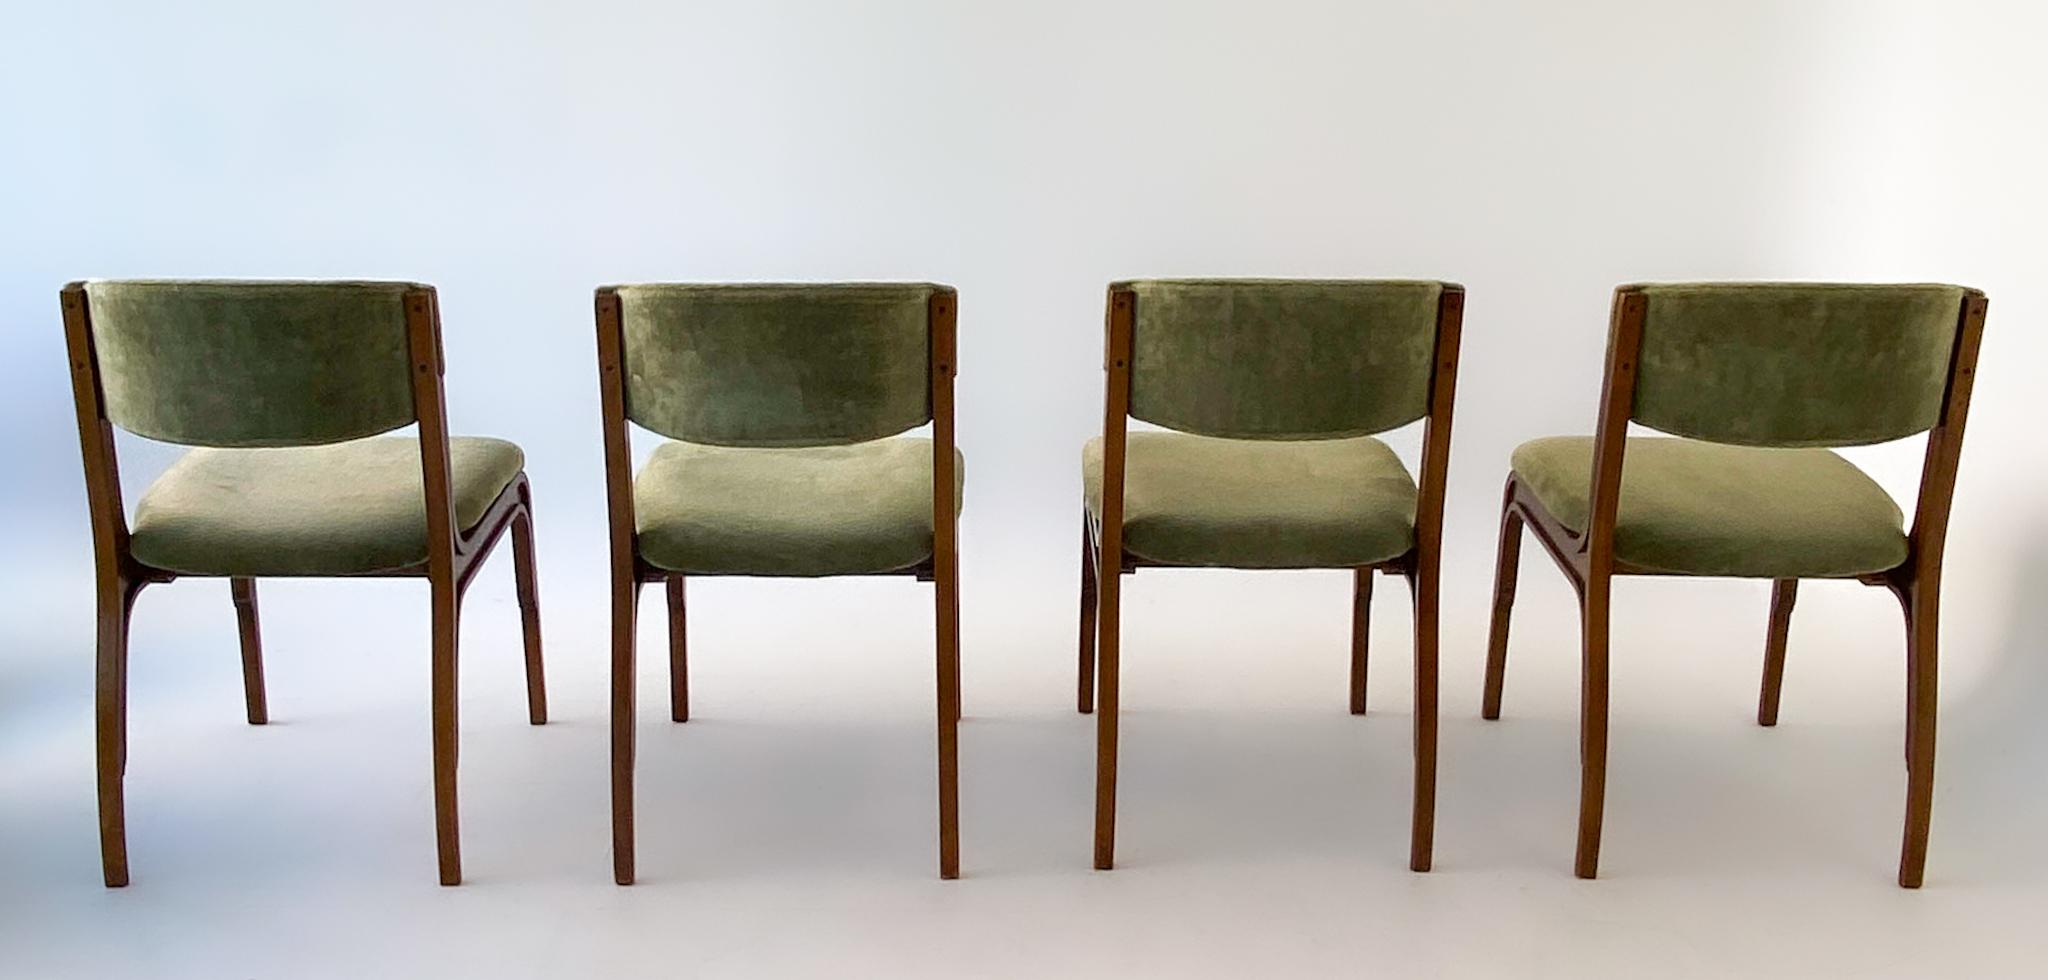 Mid-20th Century Mid-Century Modern Velvet Dining Chairs by Gianfranco Frattini, Italy 1960s